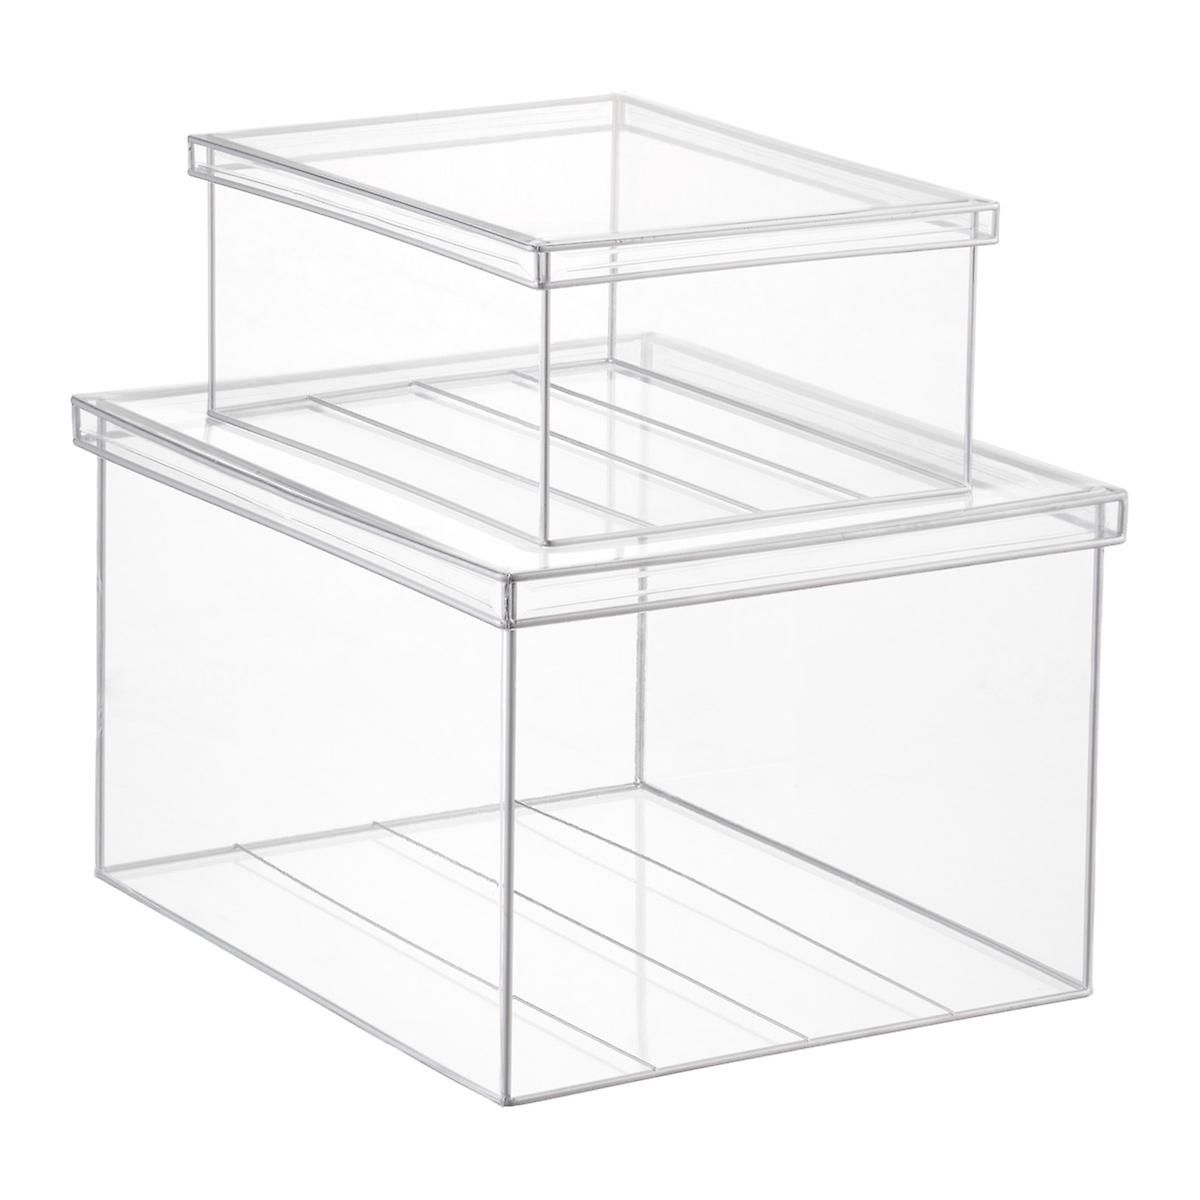 Medium Lookers Box Clear | The Container Store